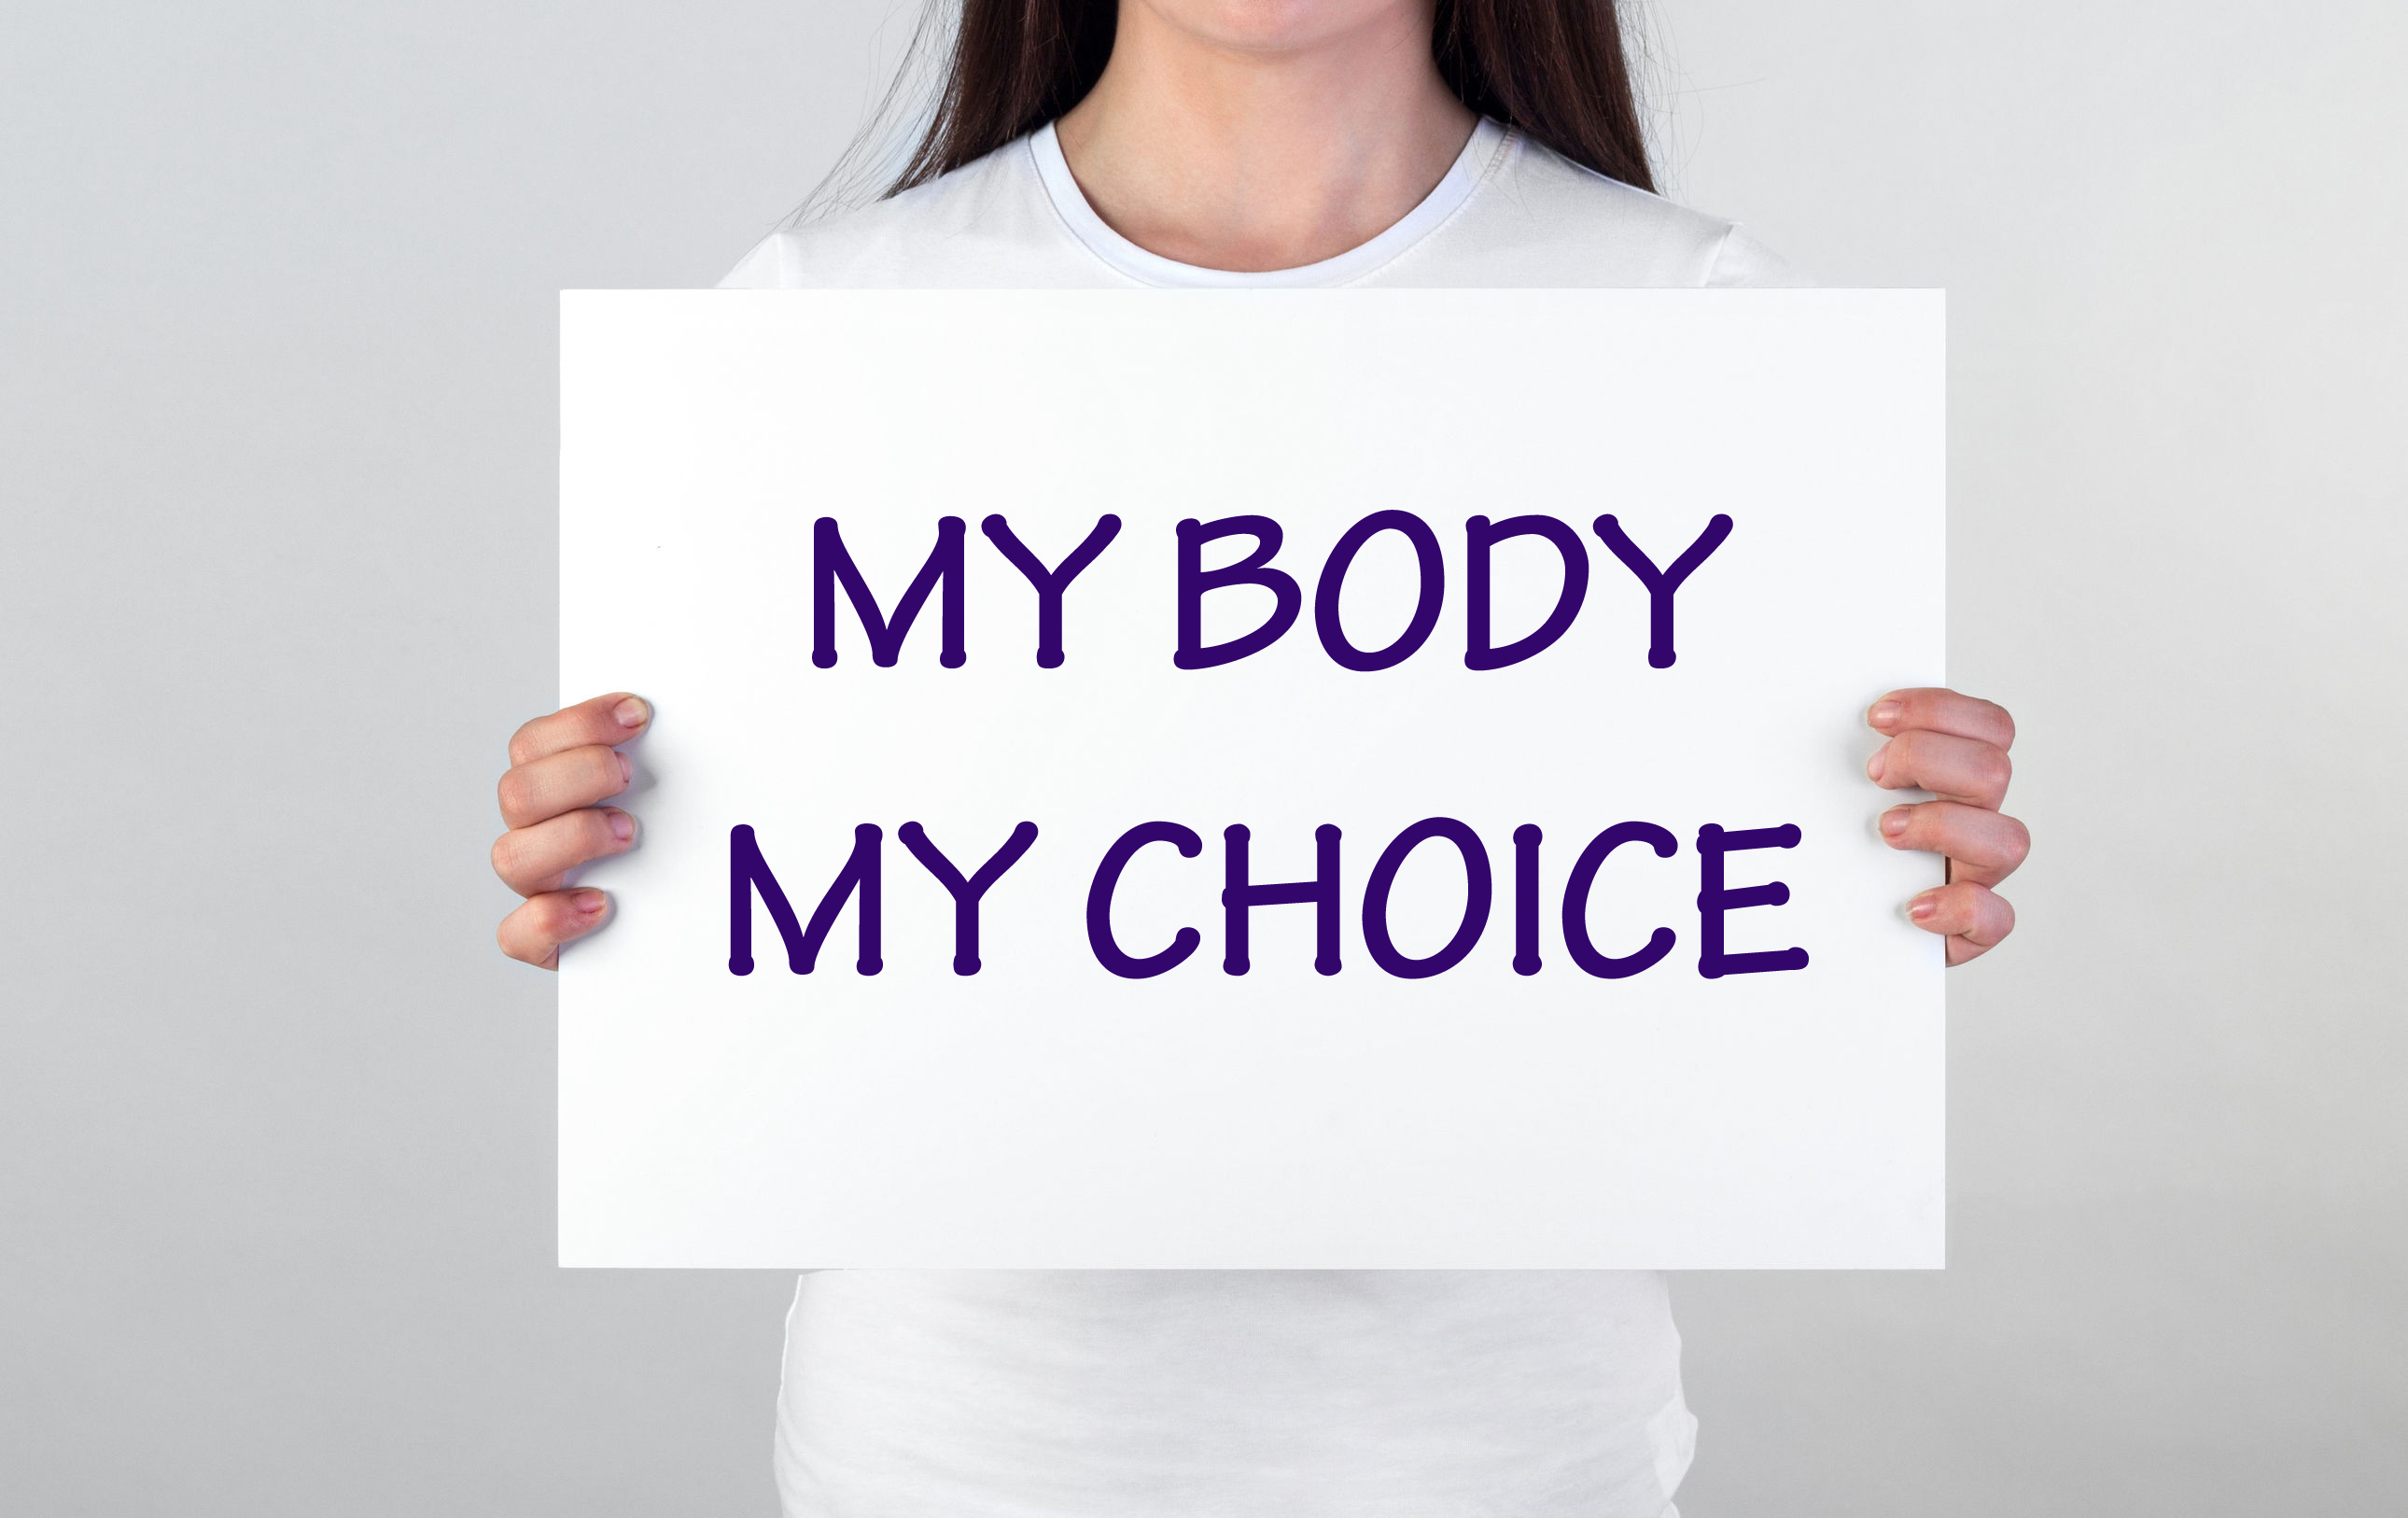 Woman holding placard that says "my body, my choice"